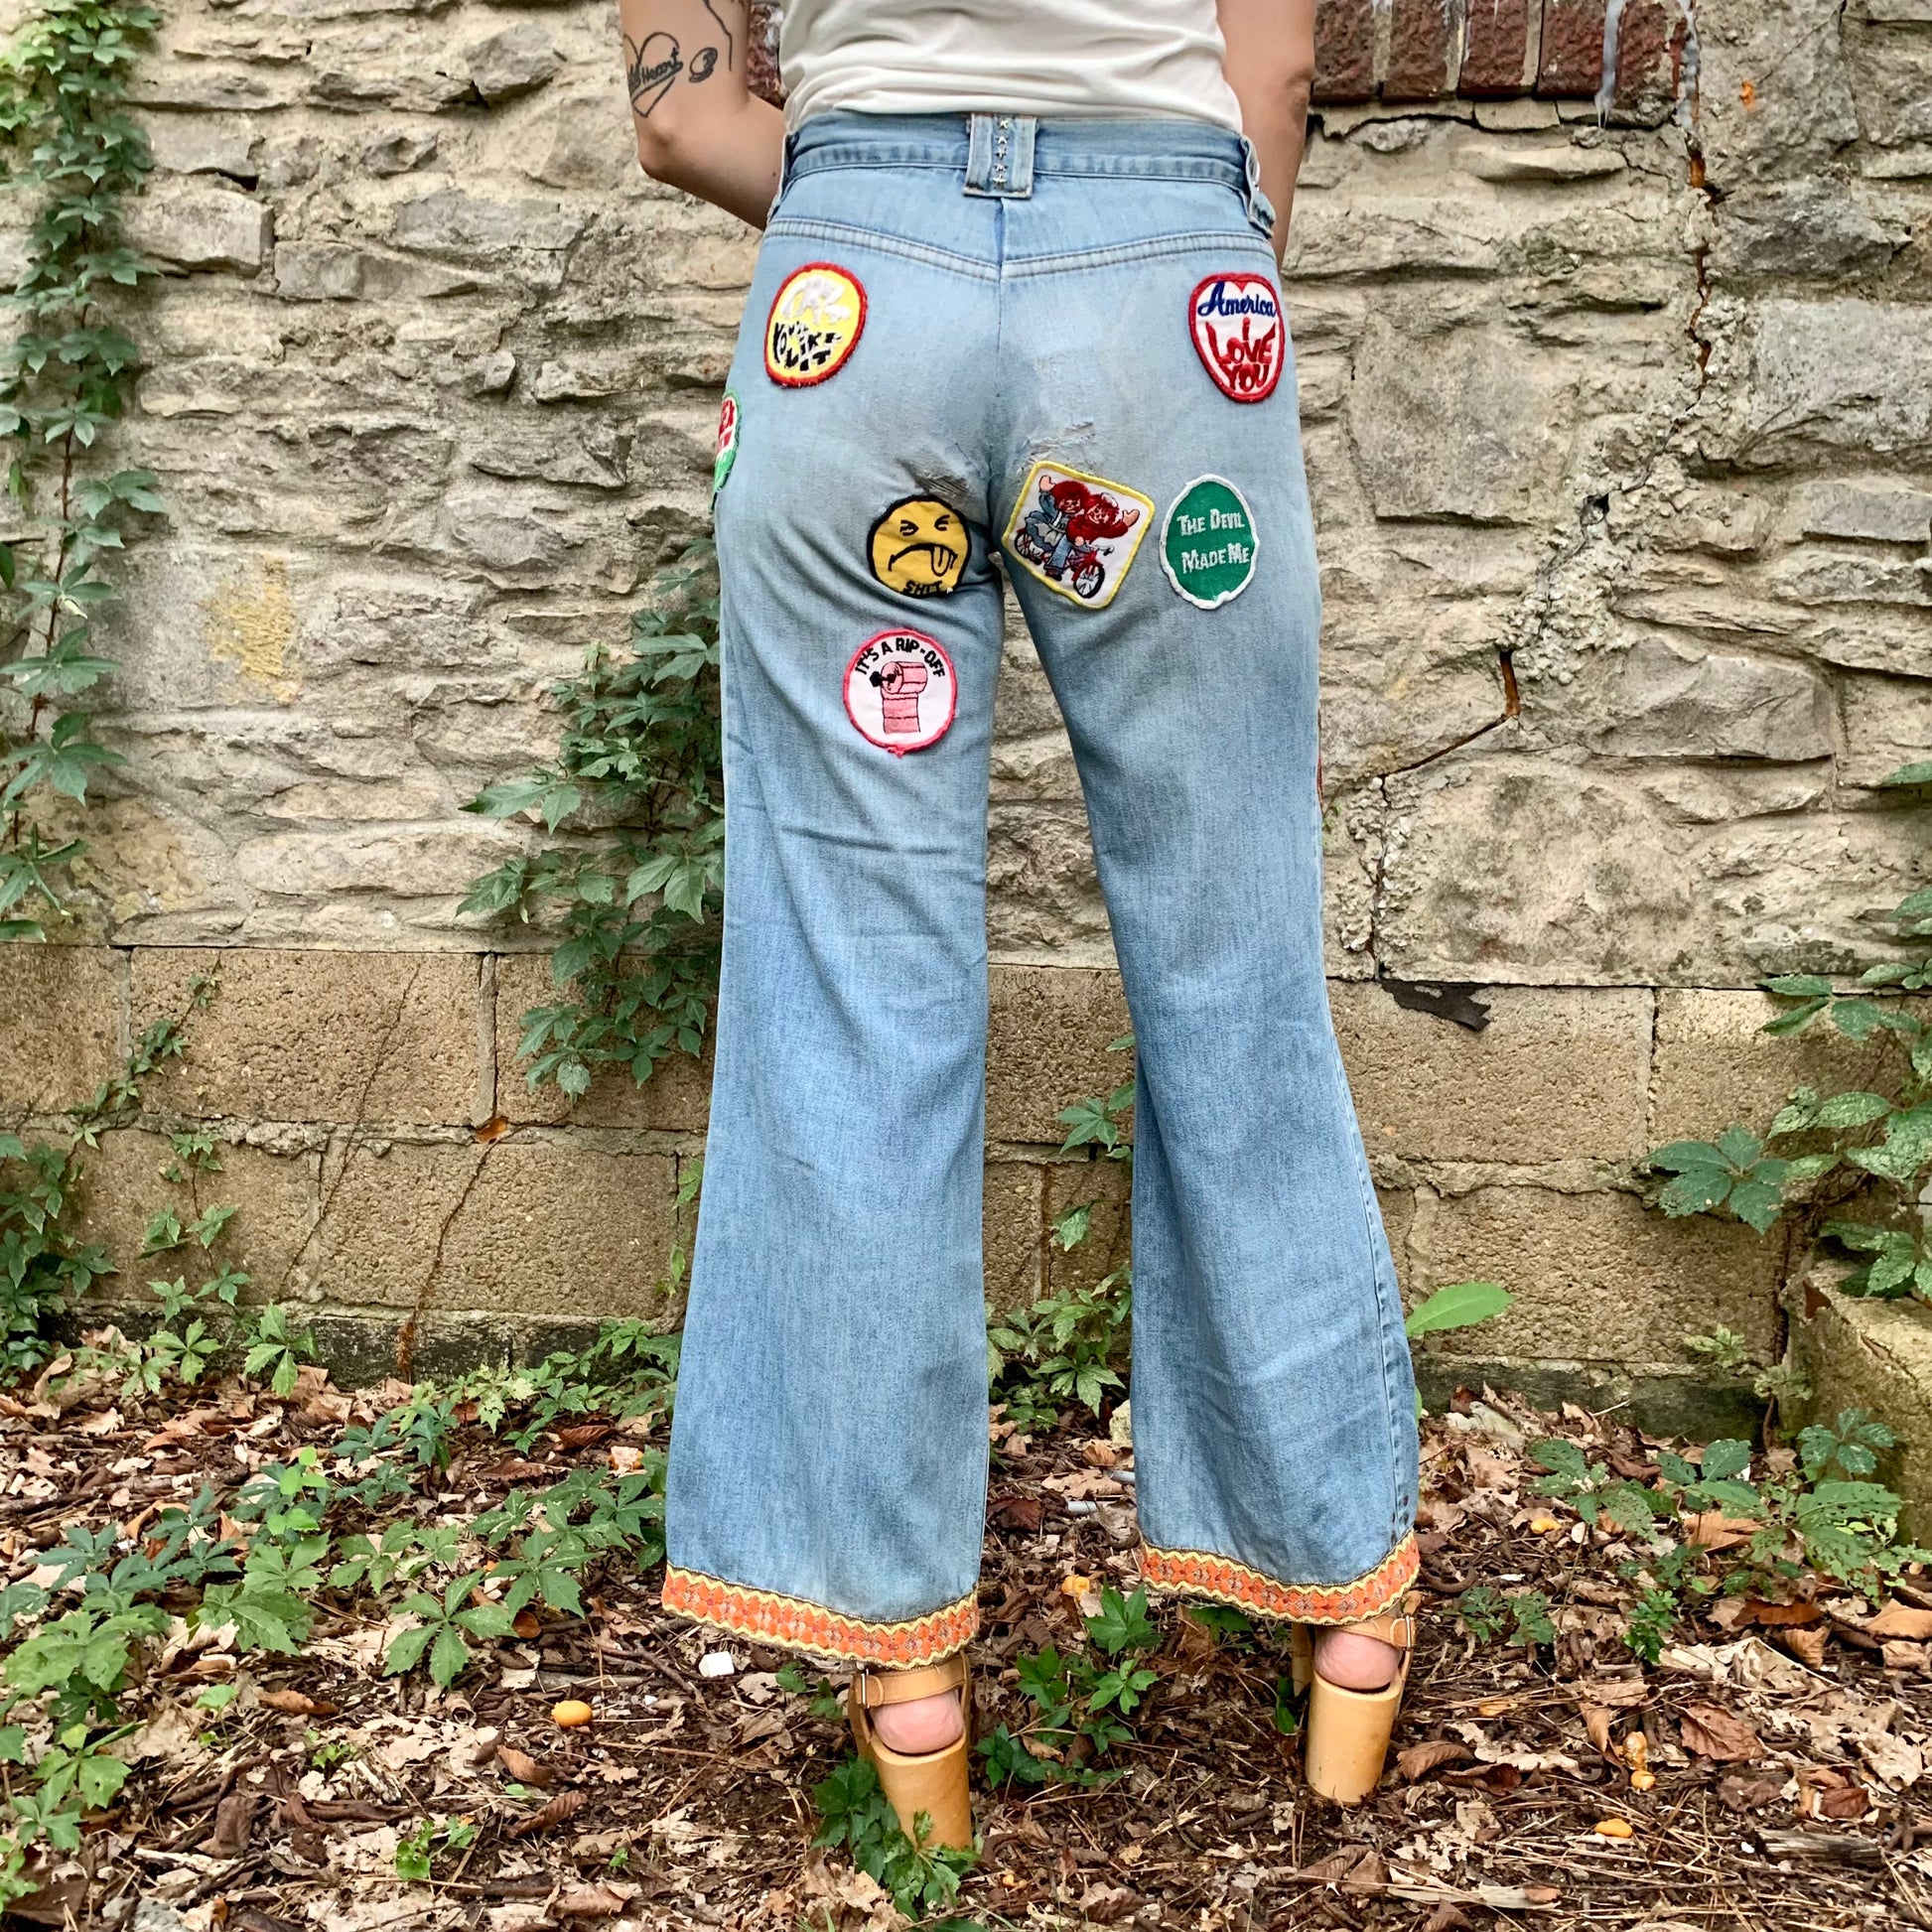 1970s blue jean patches  Patched jeans, 70s style outfits, 60s fashion  vintage